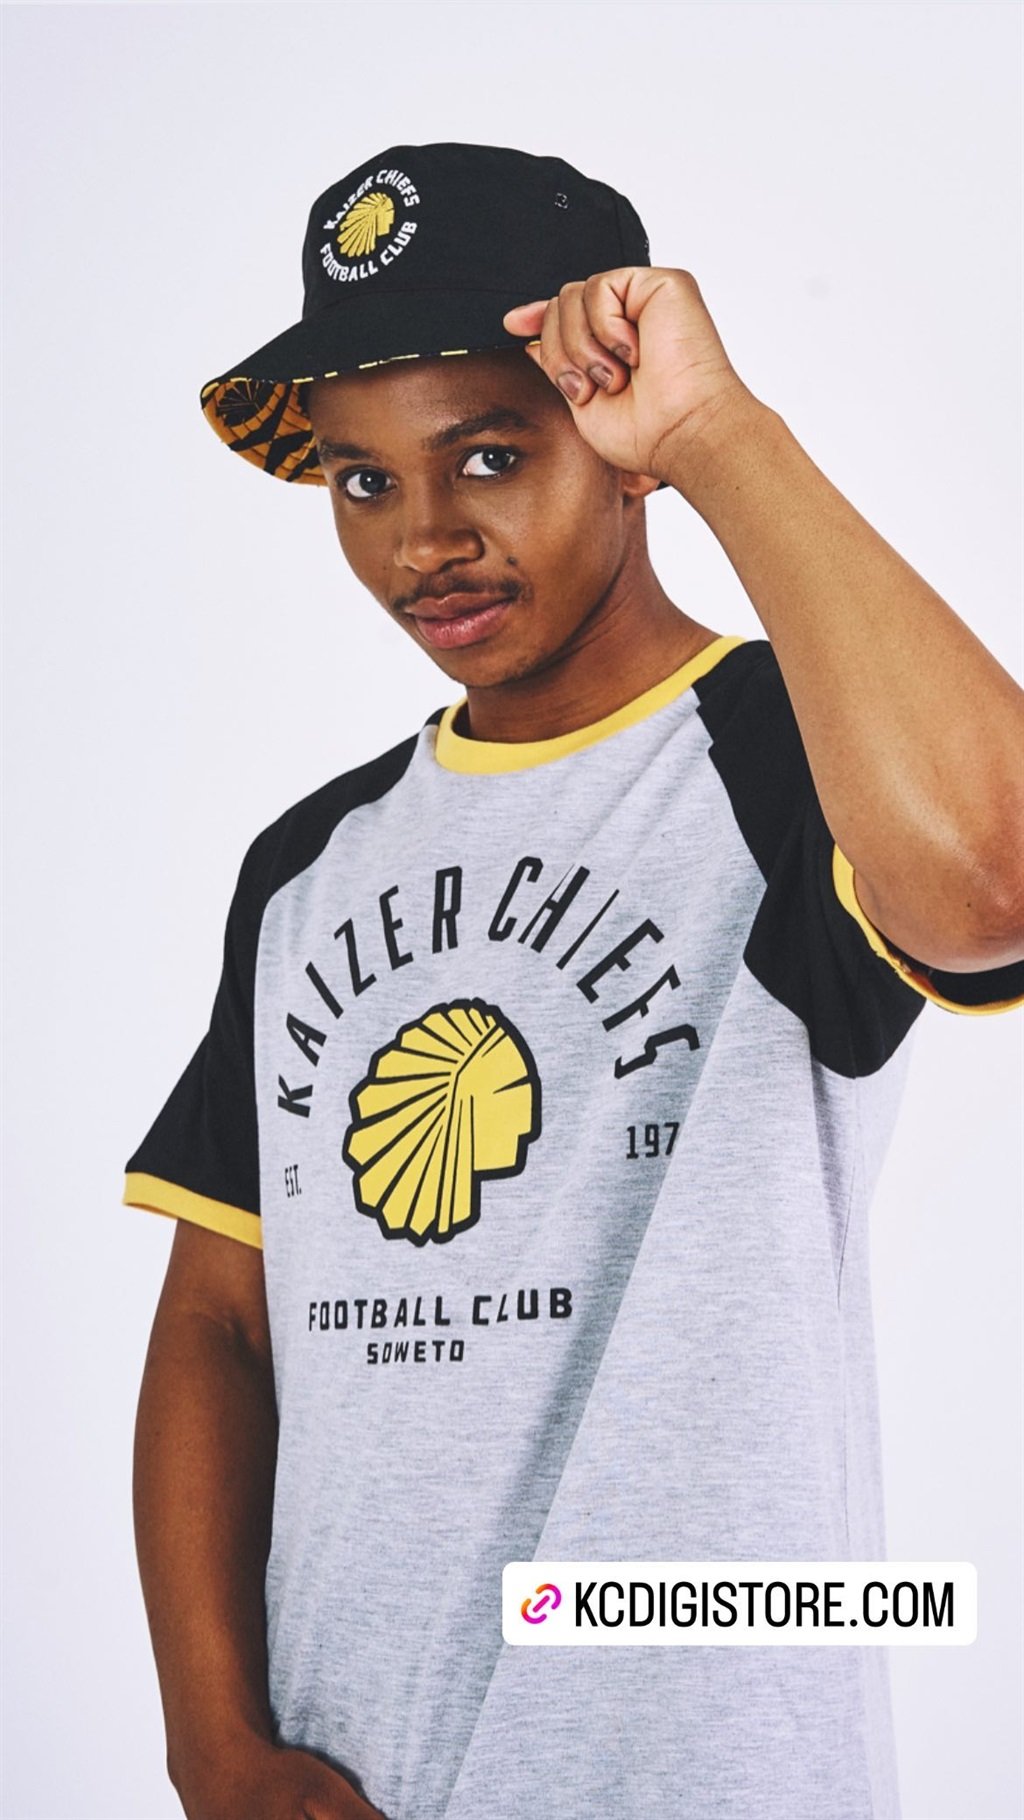 Kaizer Chiefs has released its Urban Edition Summer range.